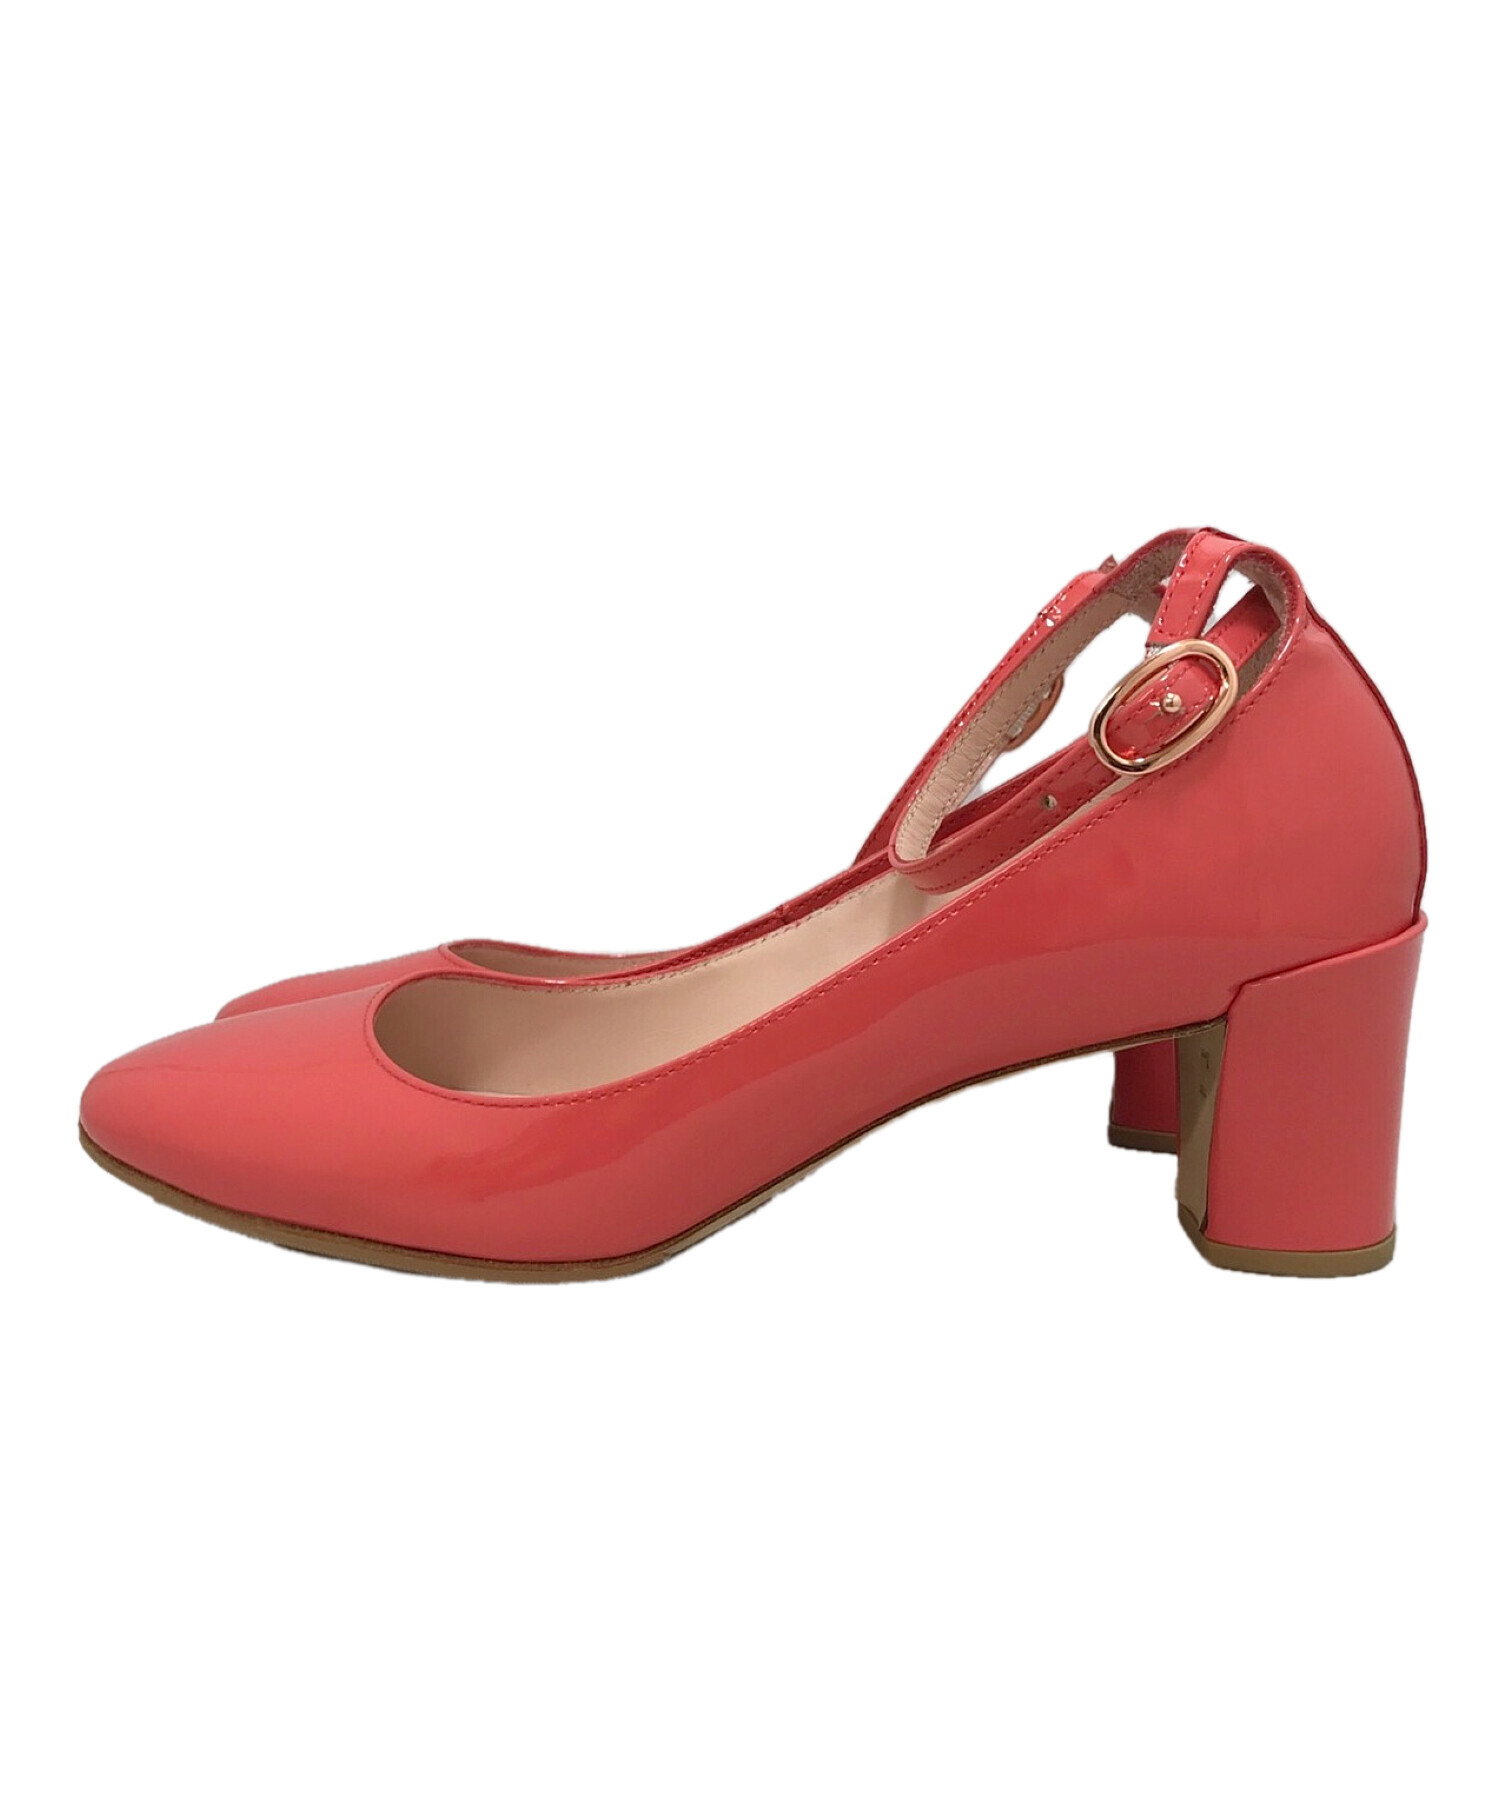 repetto (レペット) Electra mary jane/ヒールパンプス ピンク サイズ:37 1/2